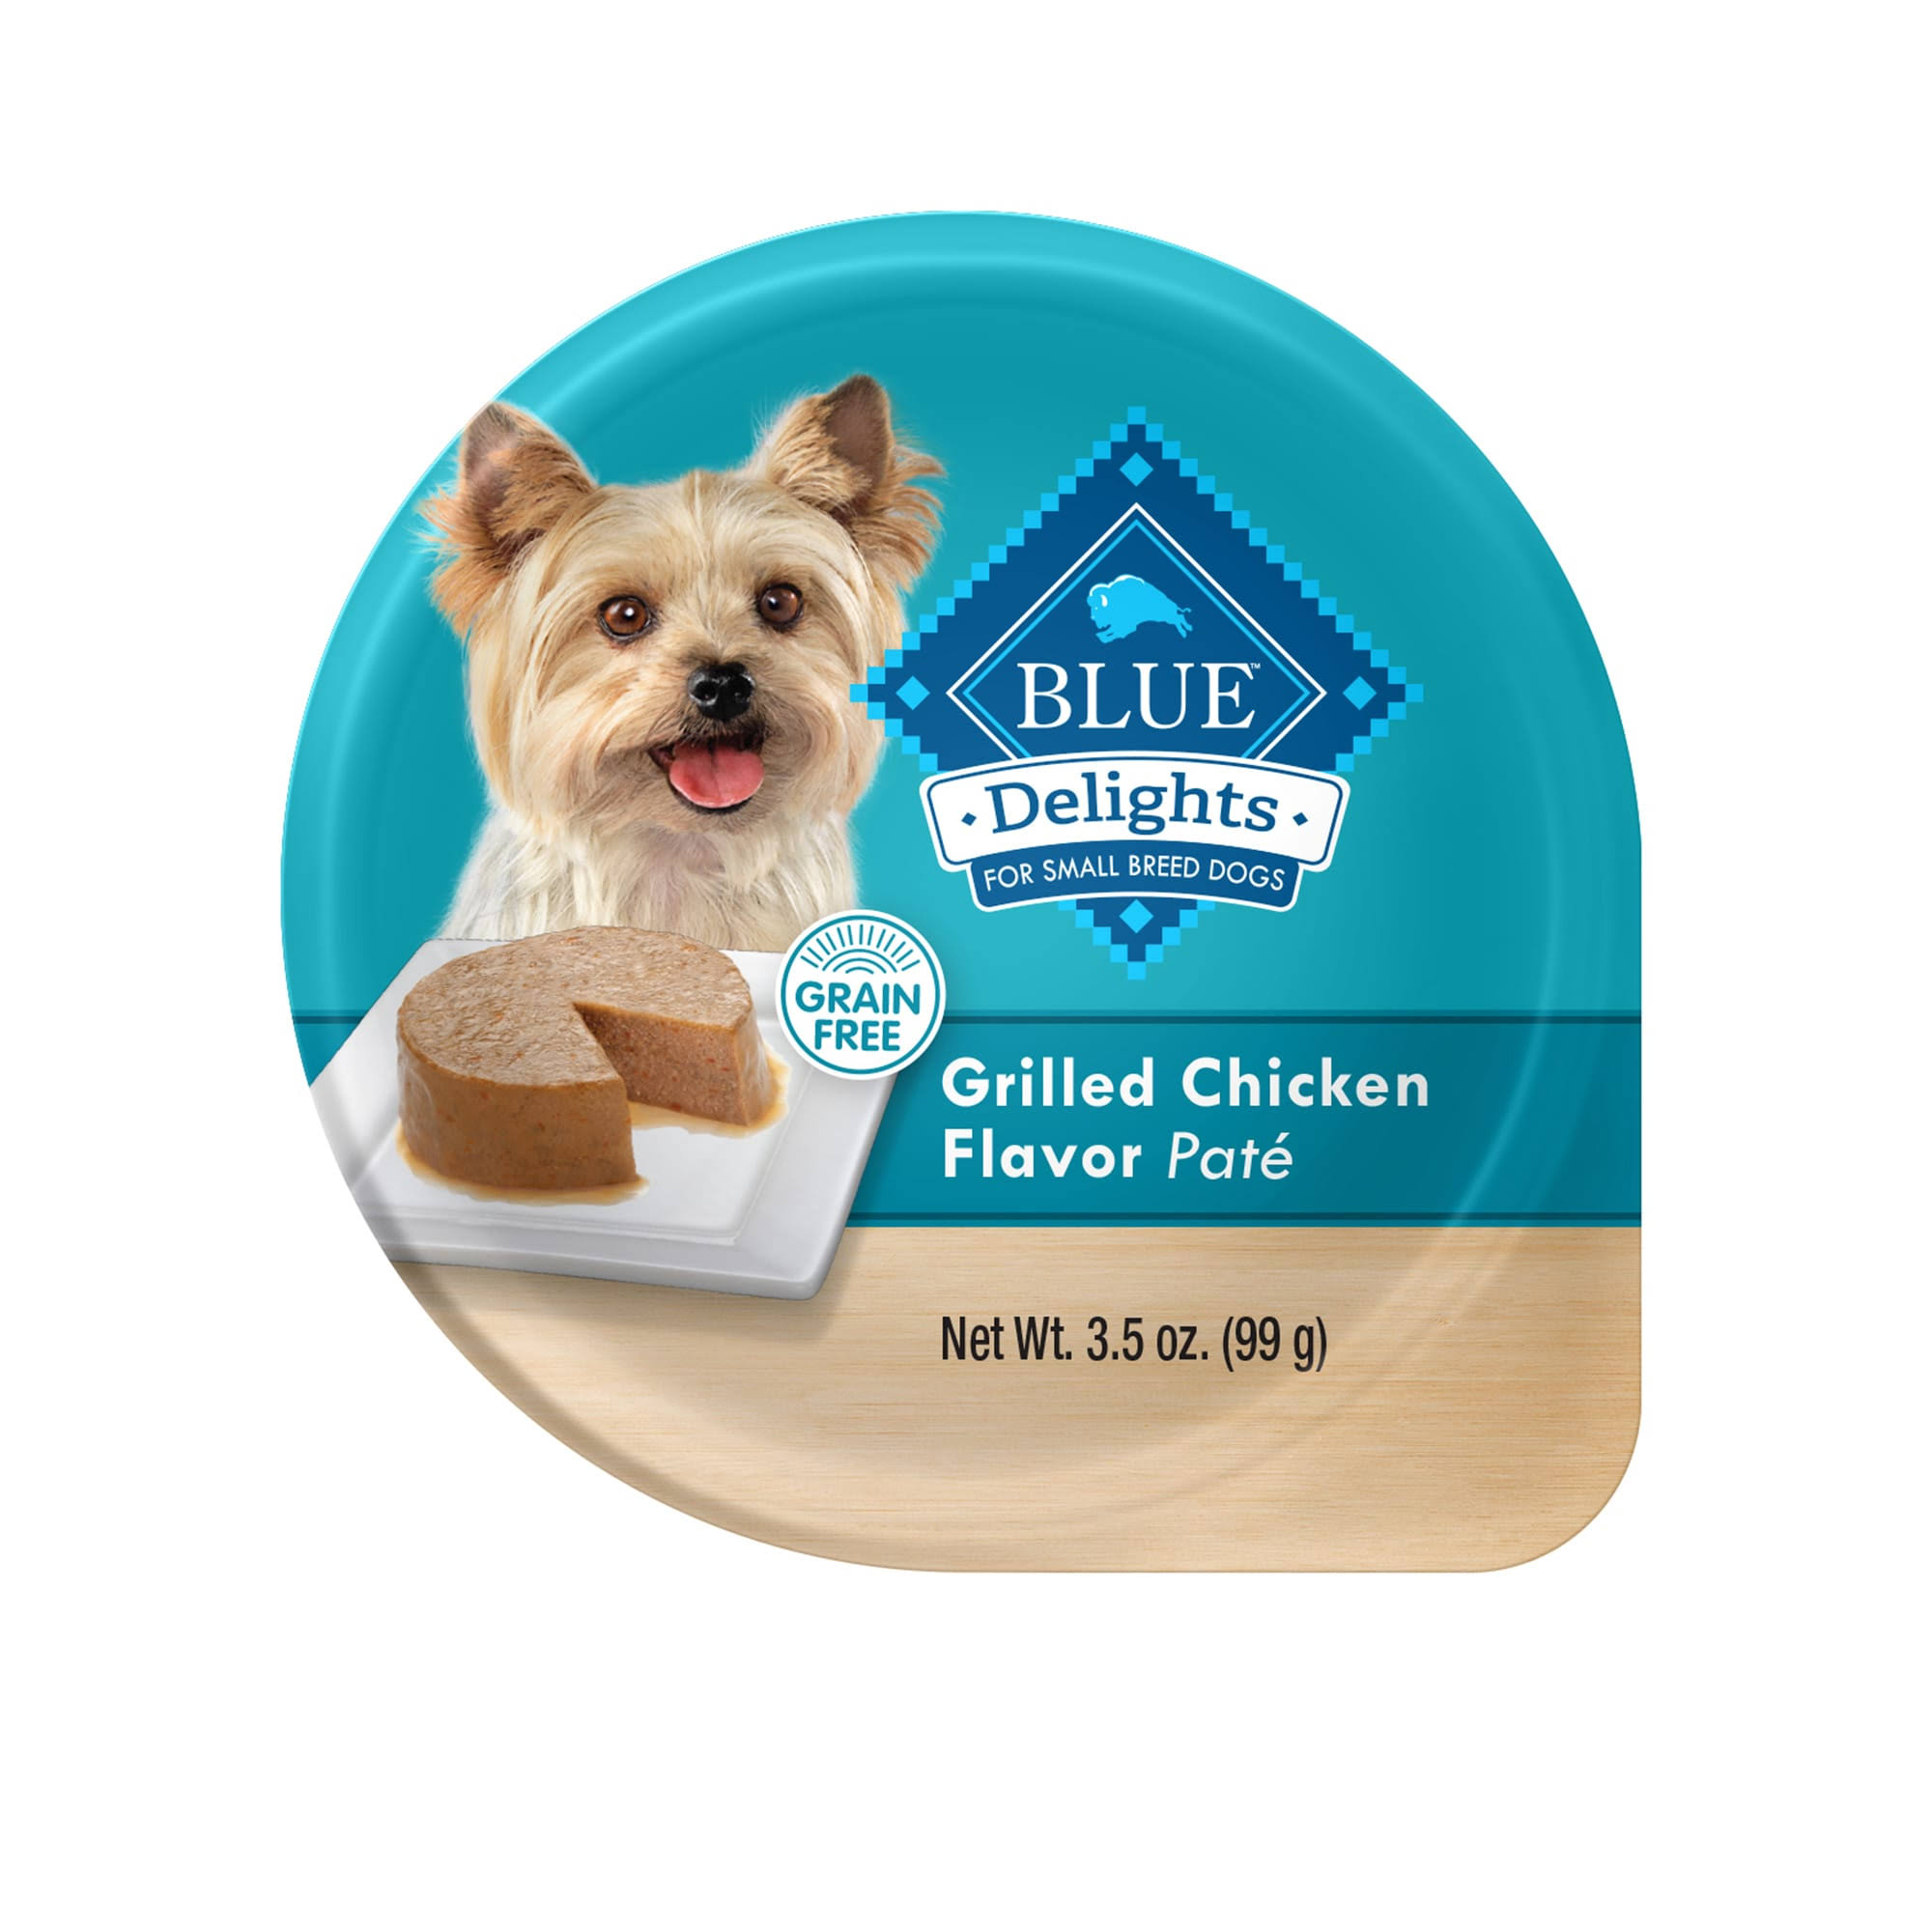 Blue Buffalo Blue Delights Dog Food, Grilled Chicken Flavor Pate, for Small Breed Dogs - 3.5 oz